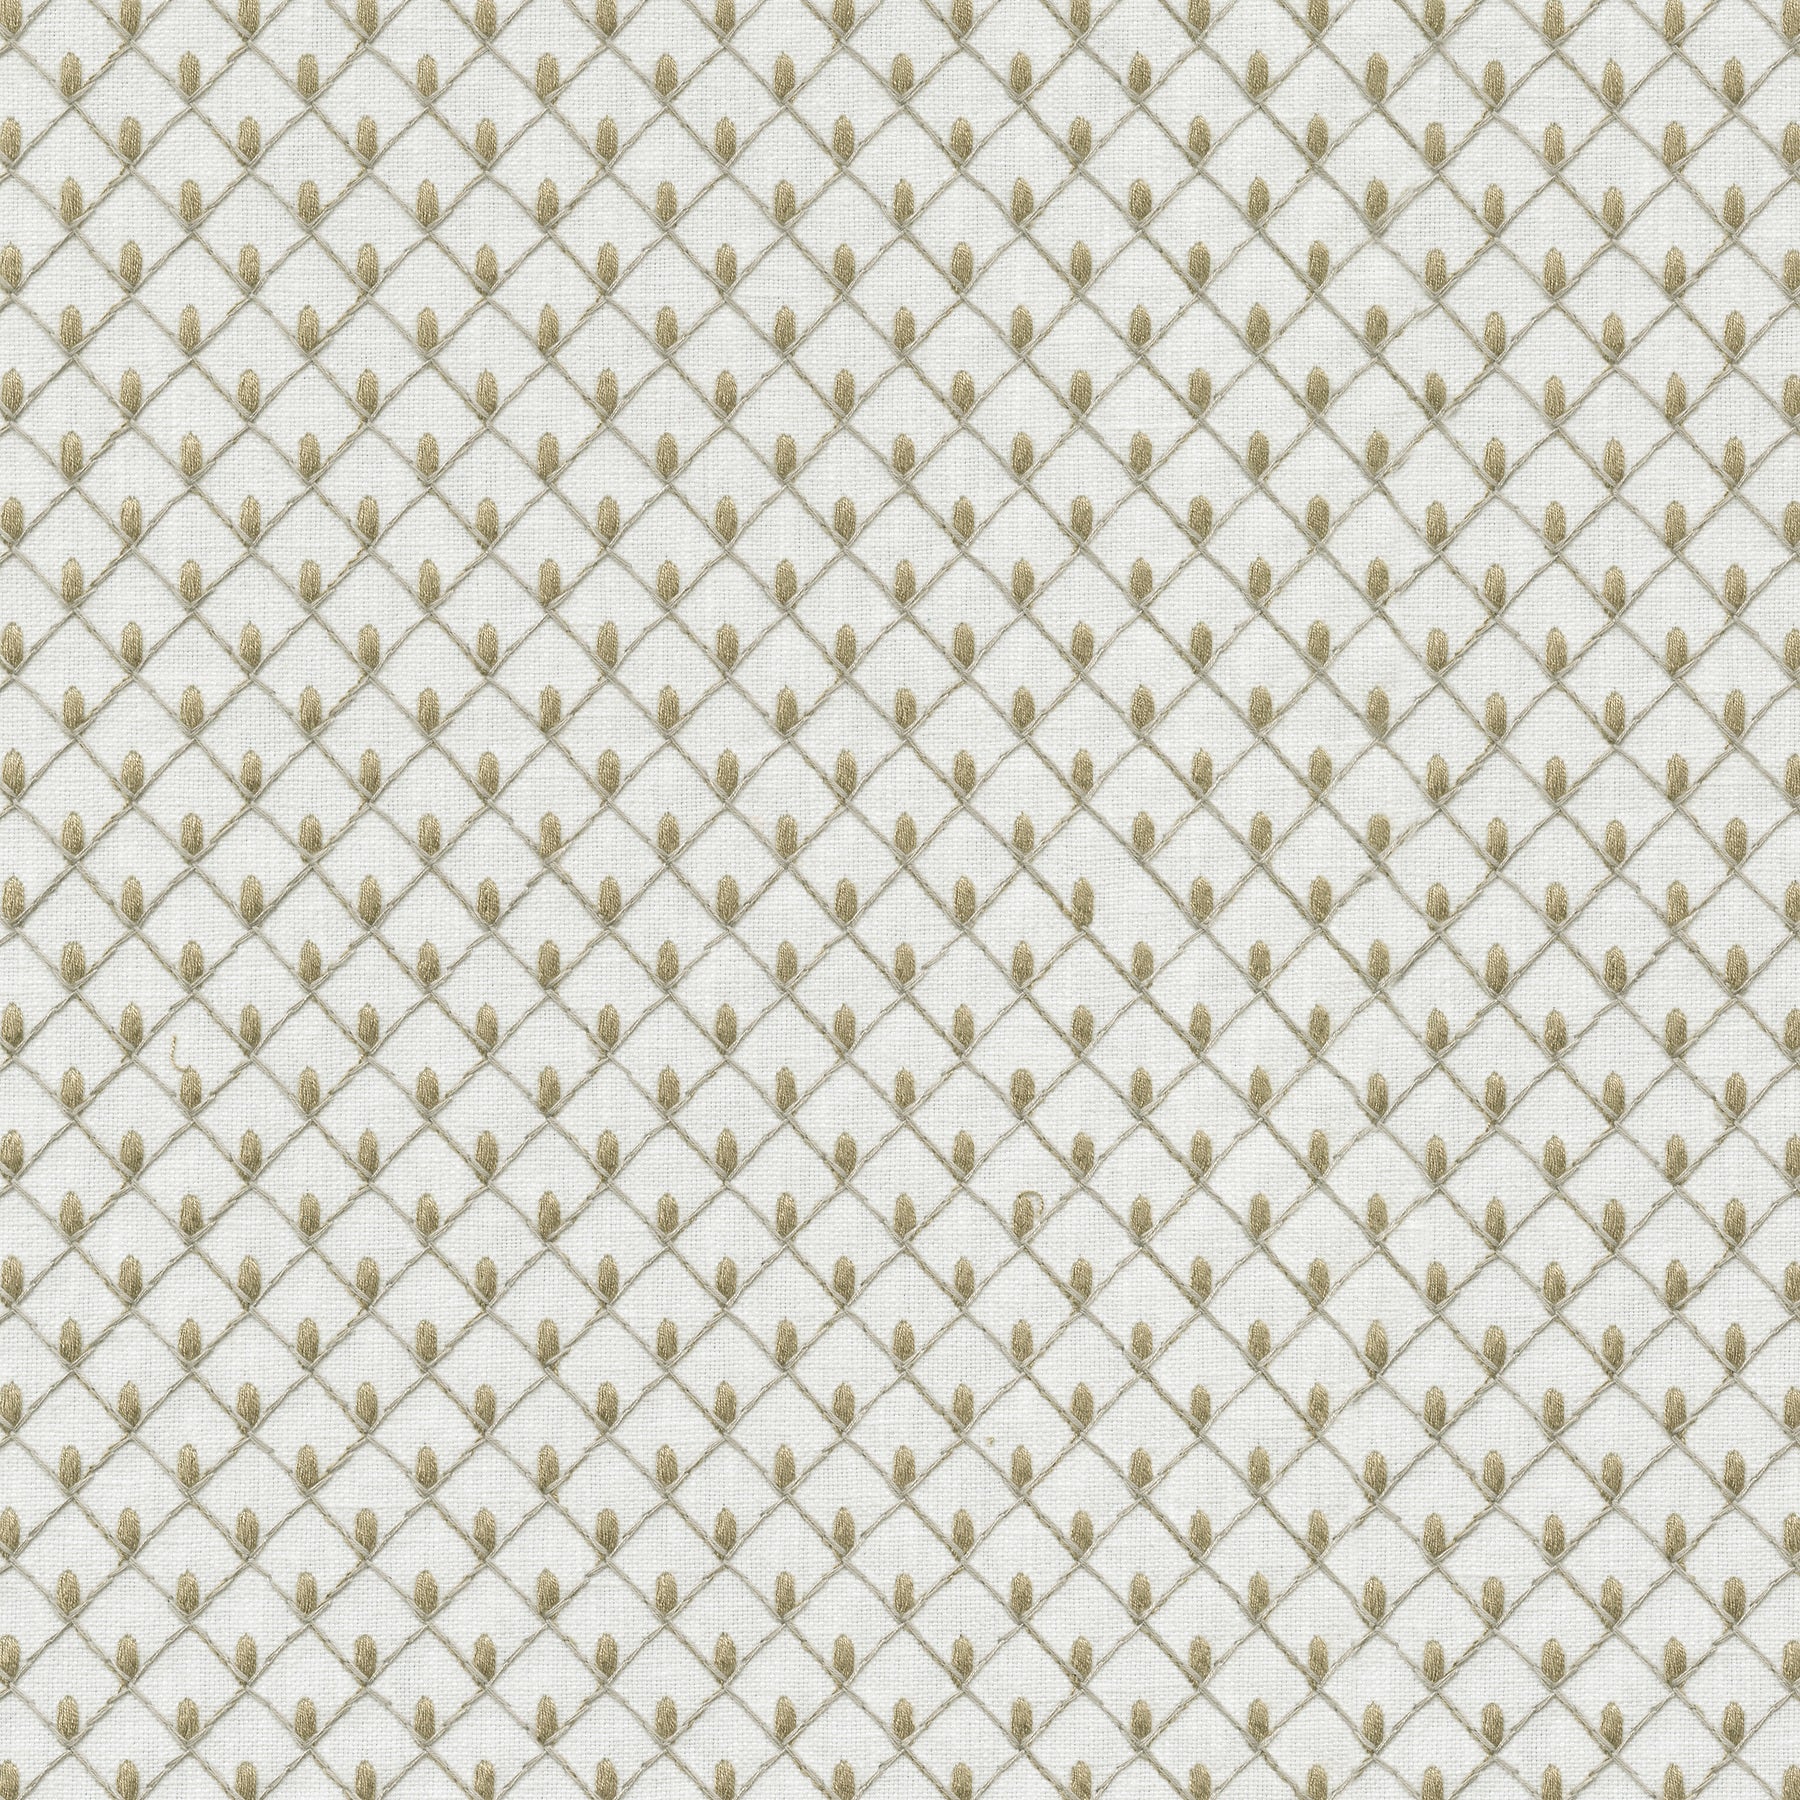 P/K Lifestyles Picot Emb - Linen 411843 Upholstery Fabric – CoCo B